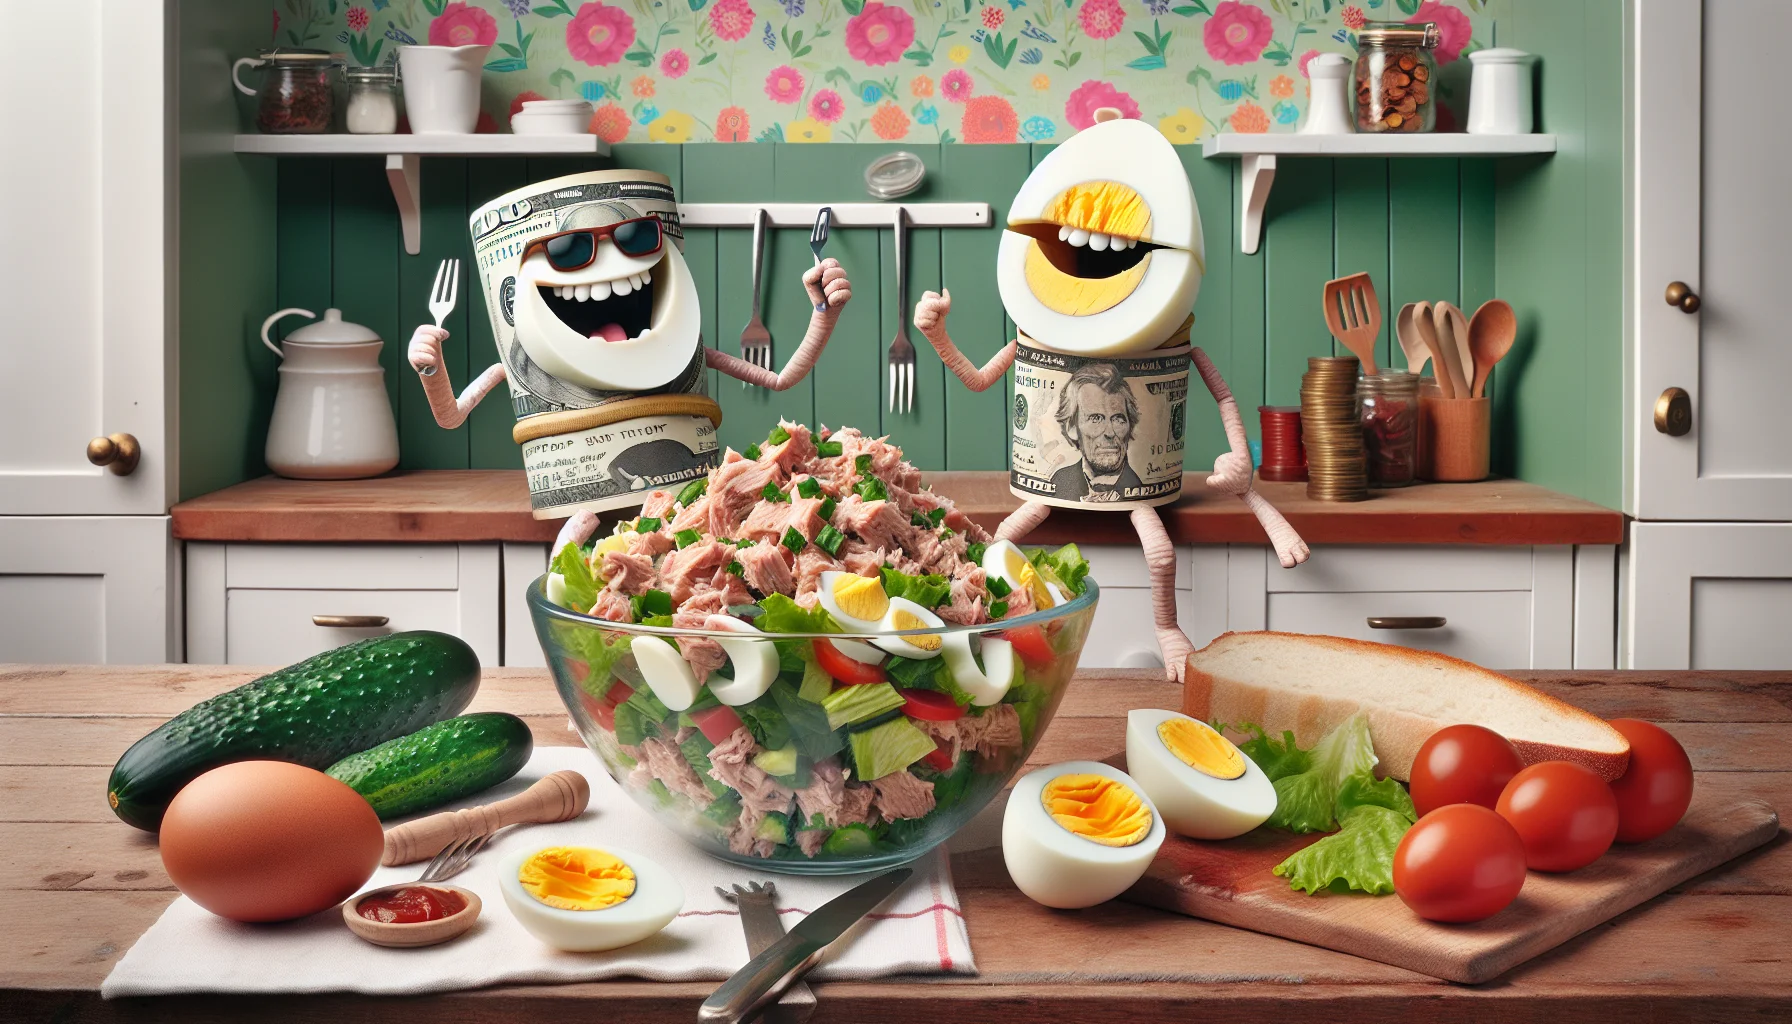 Create an image of a humorous scene featuring a tuna salad recipe with egg and relish. This scene takes place in a lively kitchen with colorful wallpaper and white cabinets. In the foreground, there's a rustic wooden table neatly arranged with precisely chopped ingredients: fresh tuna, crisp lettuce, boiled eggs, and piquant relish, all artistically displayed. A couple of anthropomorphized banknotes and coins, who are donning hats and carrying forks, are laughing around a bowl of the almost finished salad, displaying their enthusiasm and joy. The scenario carries a lighthearted message to inspire people to eat healthily and economically.